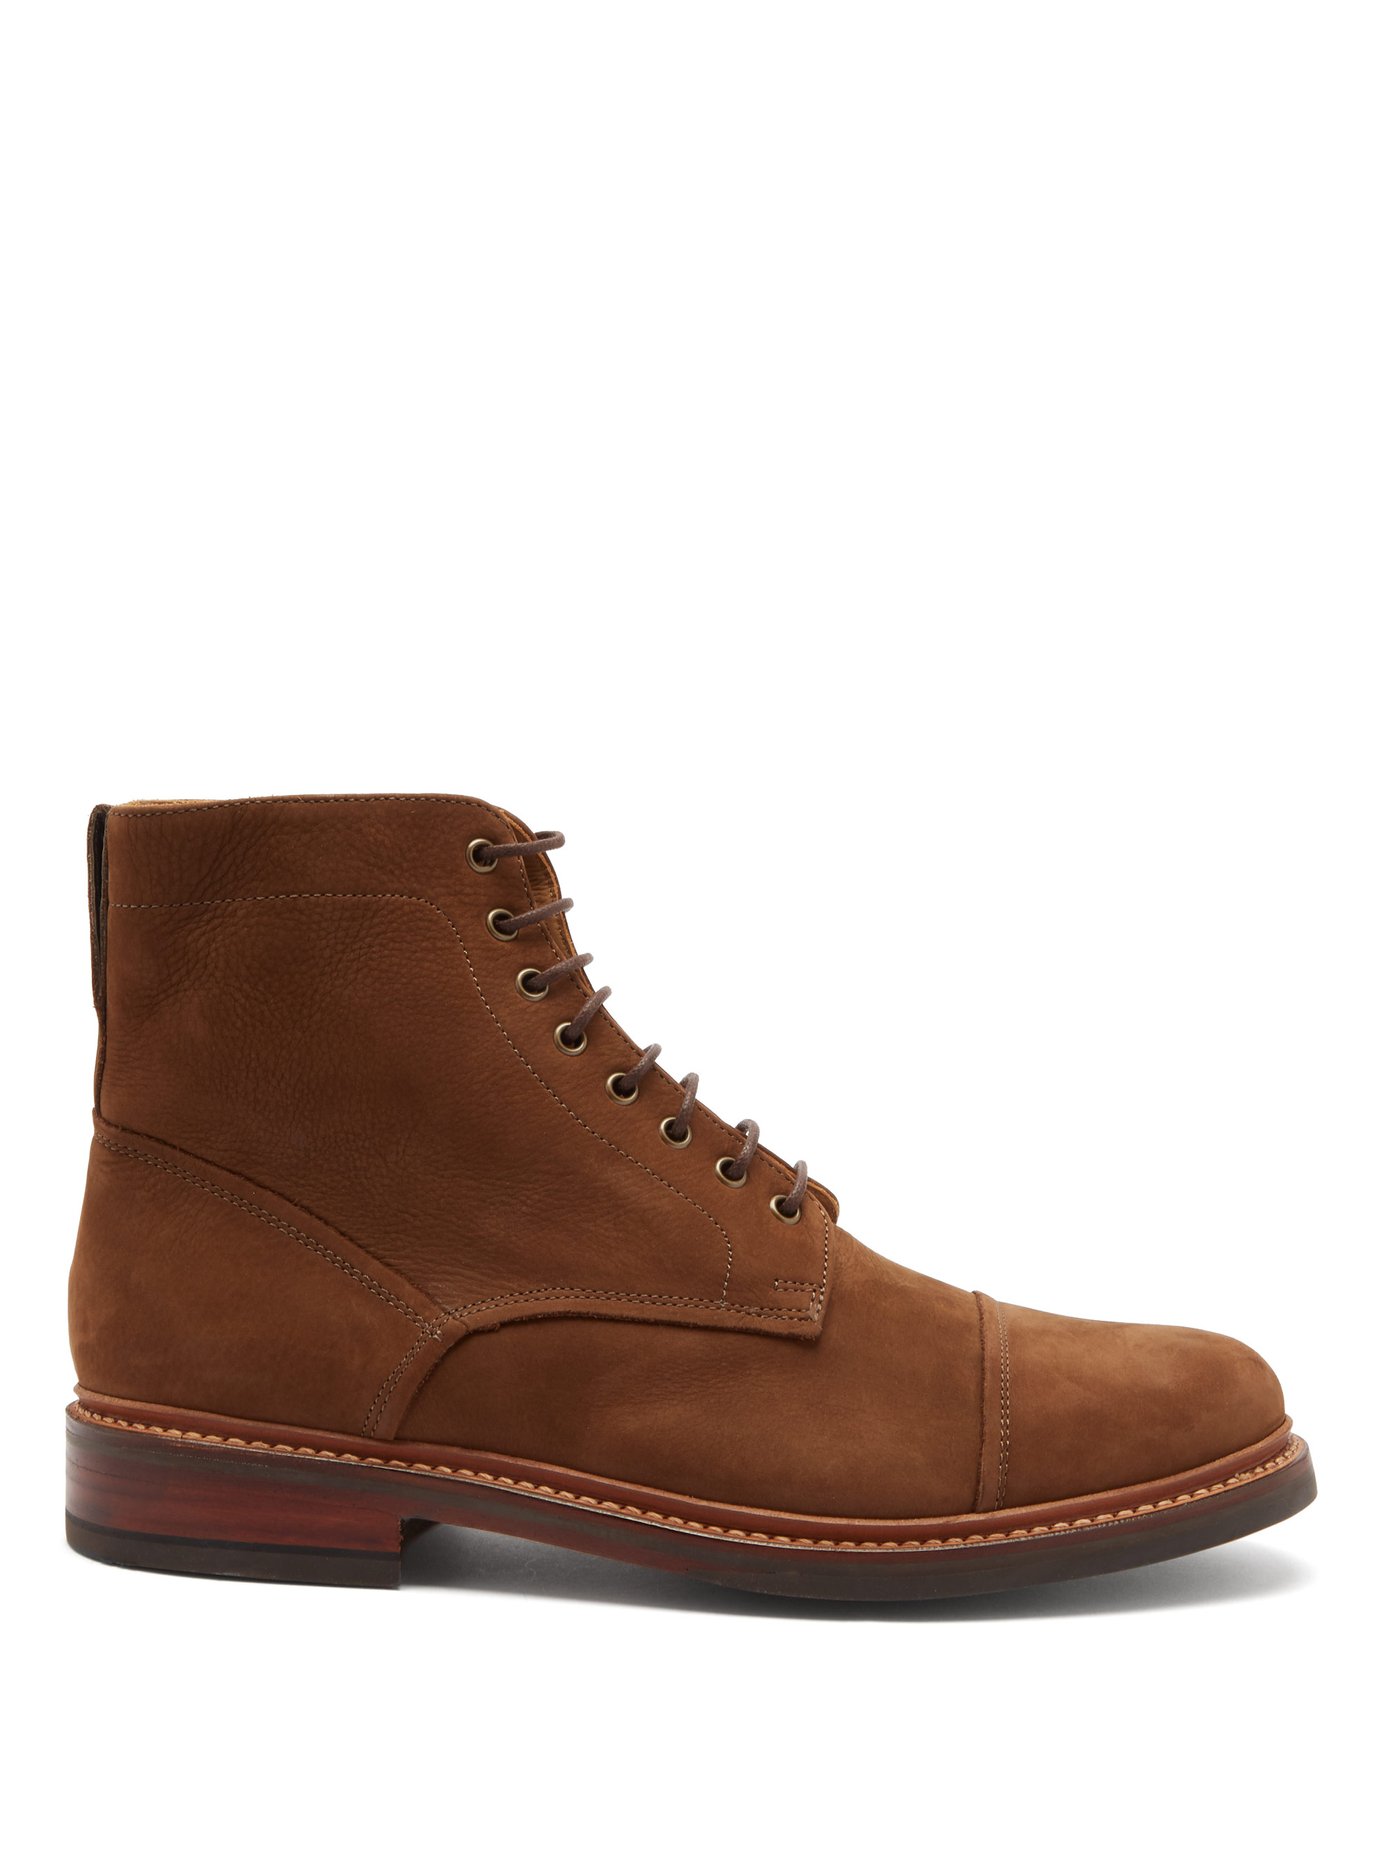 Joseph lace-up suede boots | Grenson 